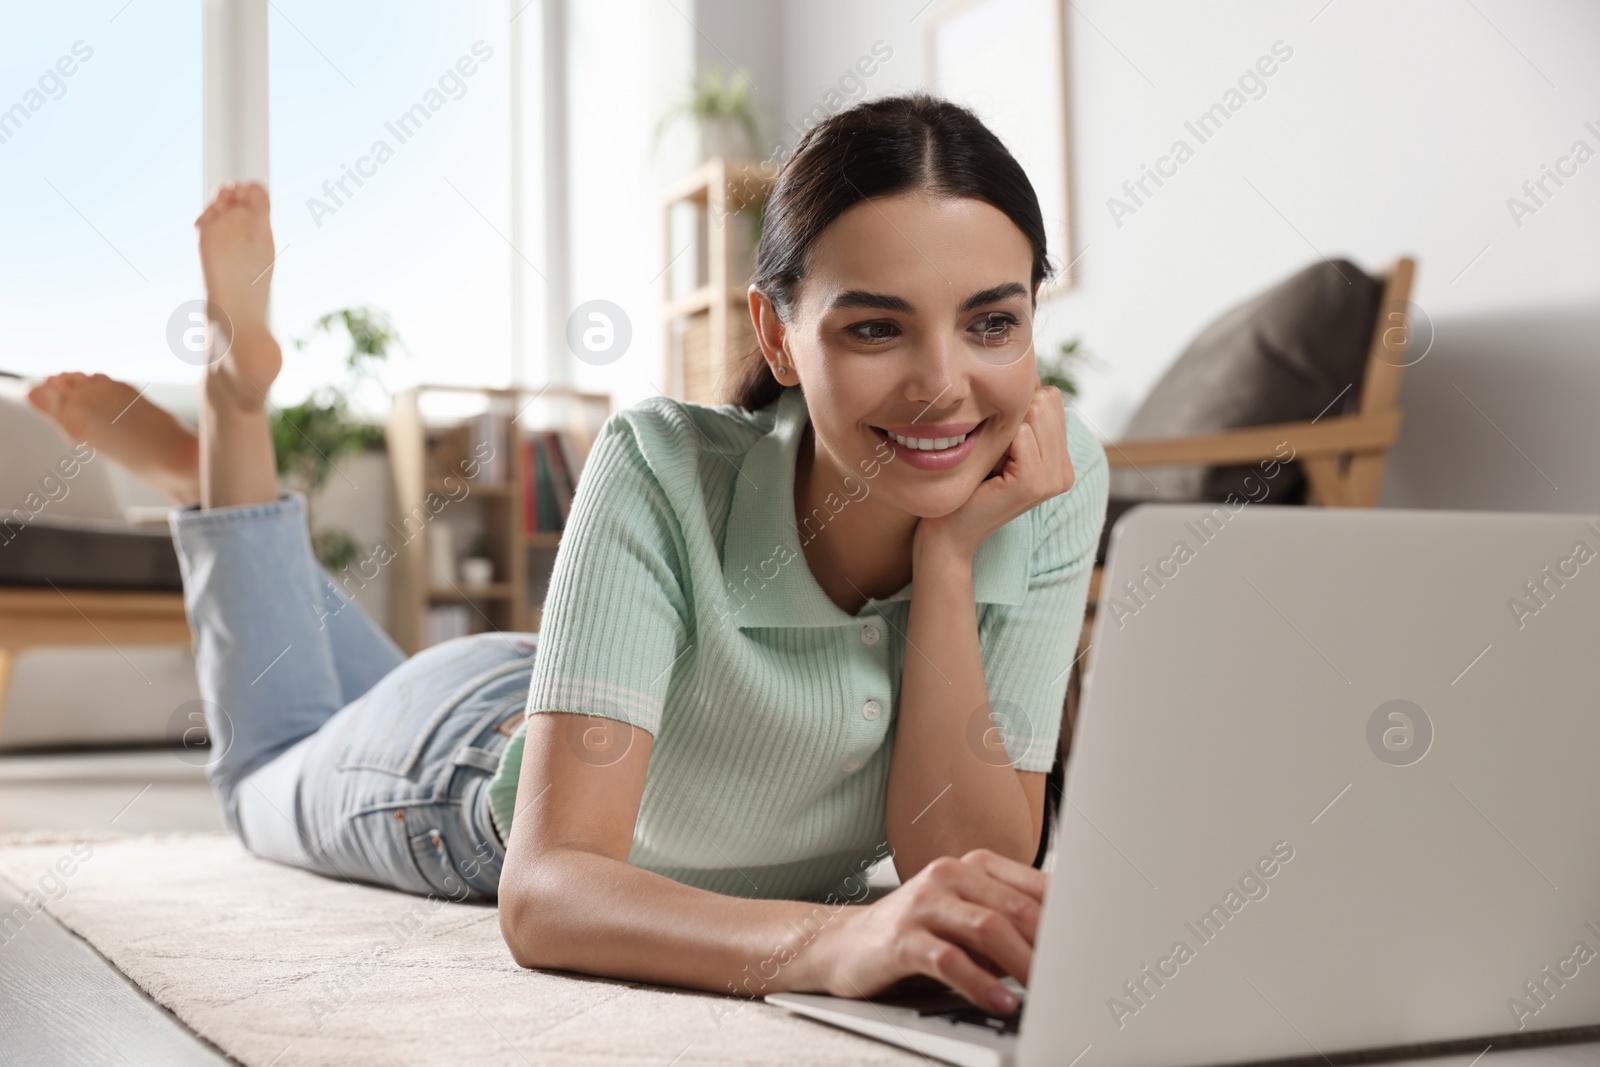 Photo of Young woman working with laptop on floor at home